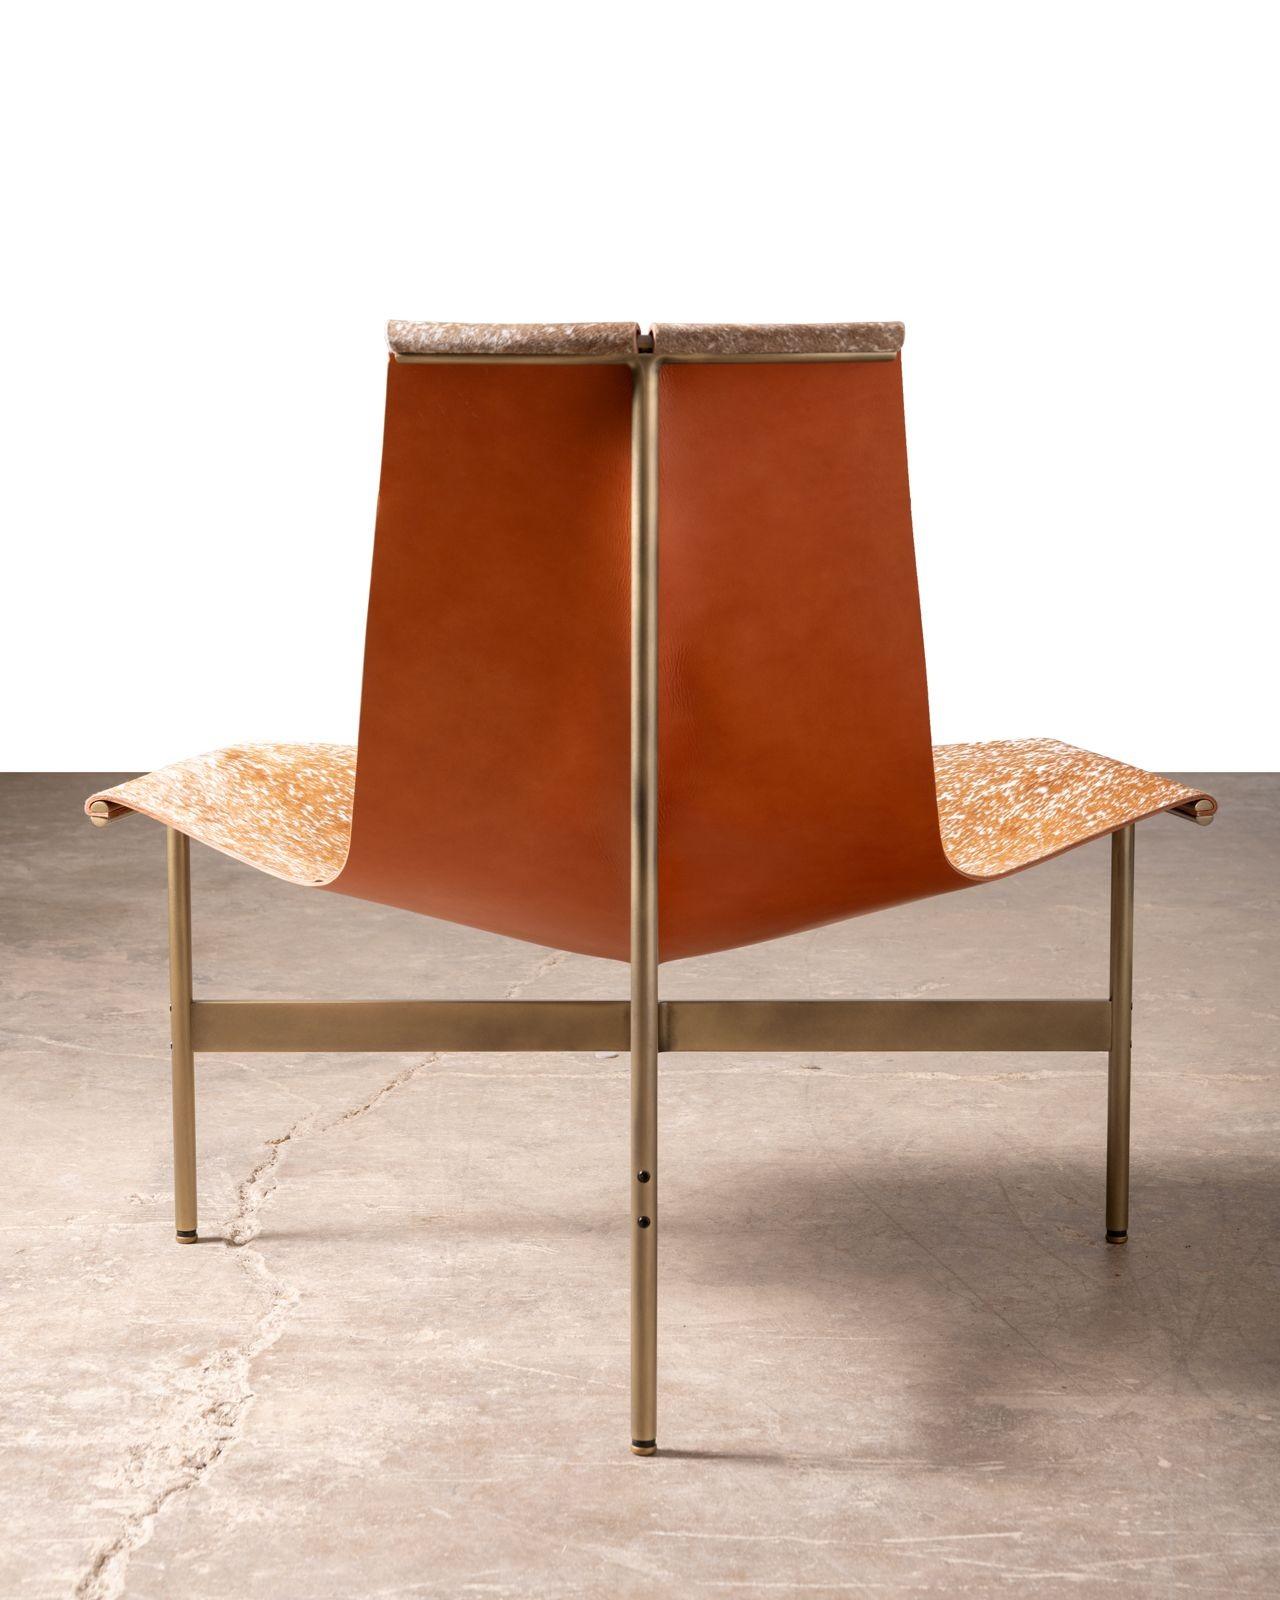 'TH-15' Sling Lounge Chair in bronze & hair on hide by Katavolos Littell & Kelly In Good Condition For Sale In Dallas, TX